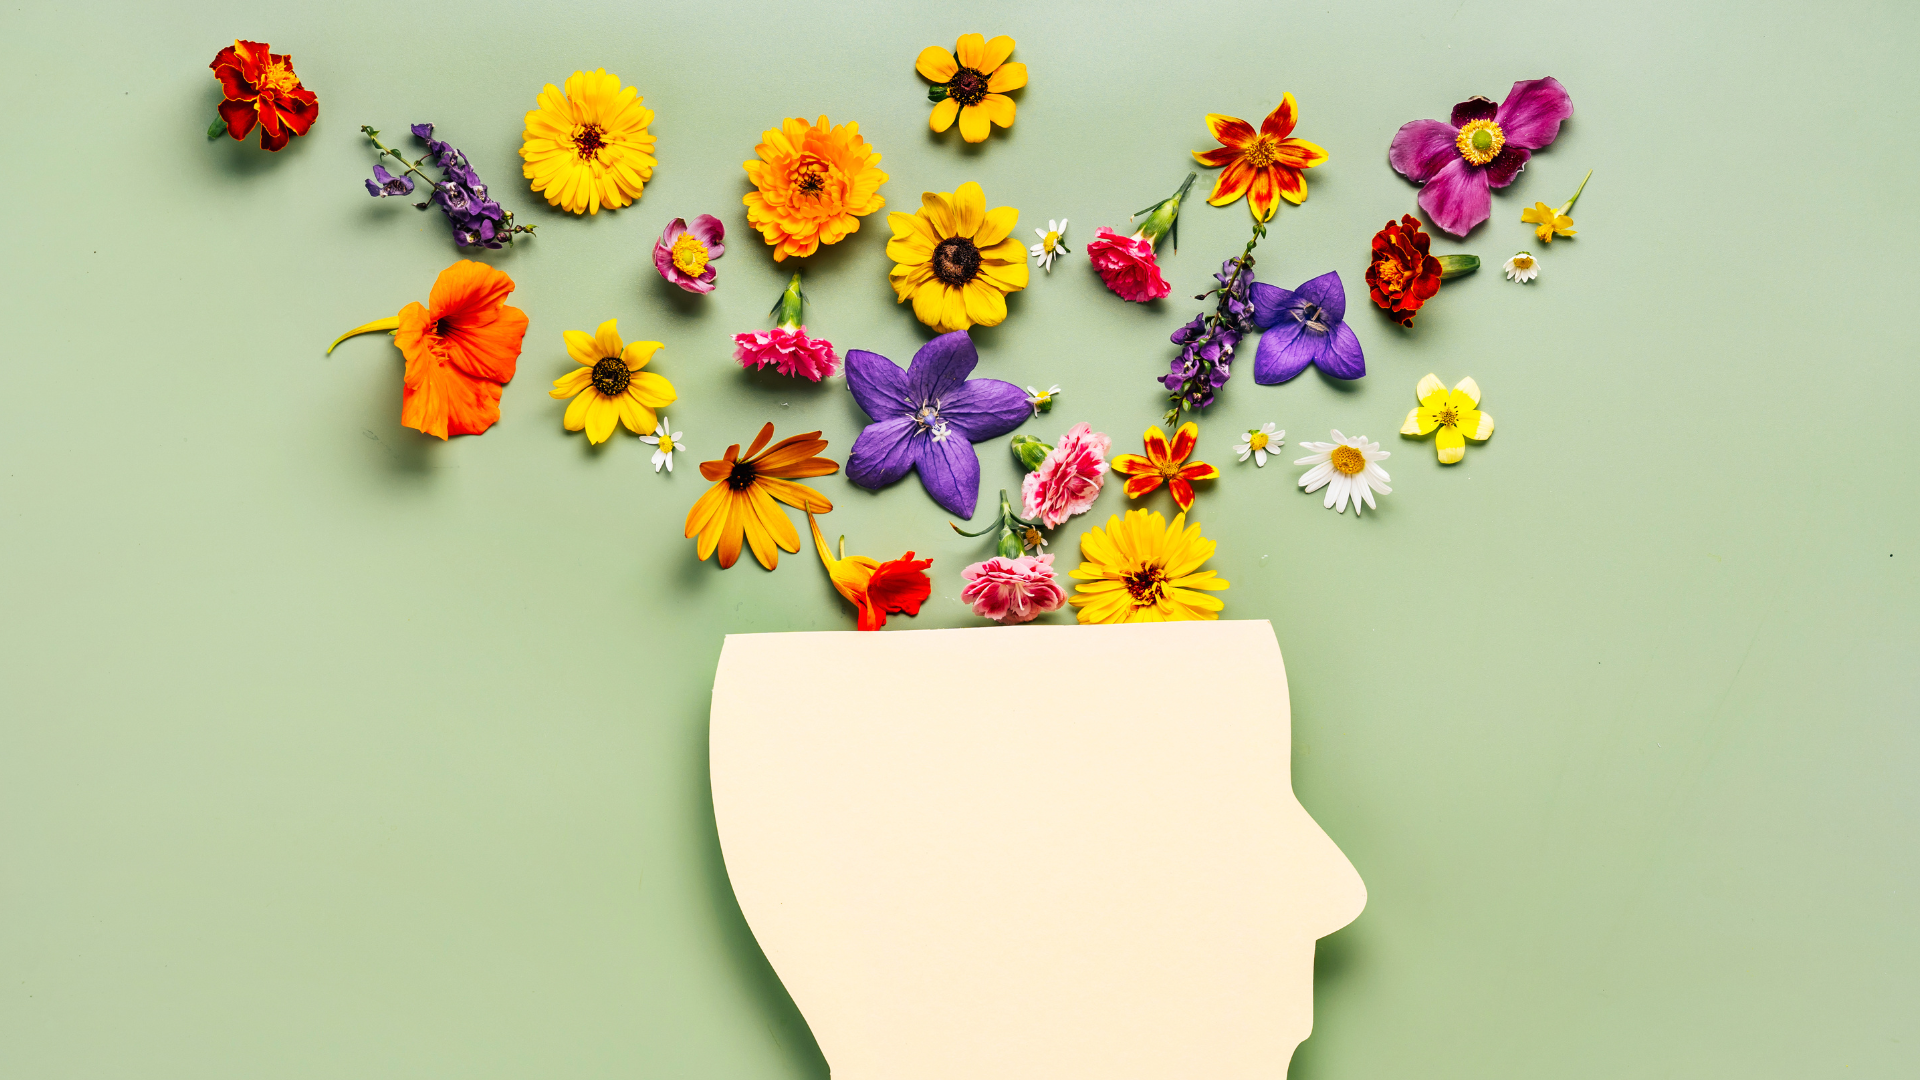 Graphic with a light green background, with a paper cutout image of a head with colorful wildflowers coming out of the top